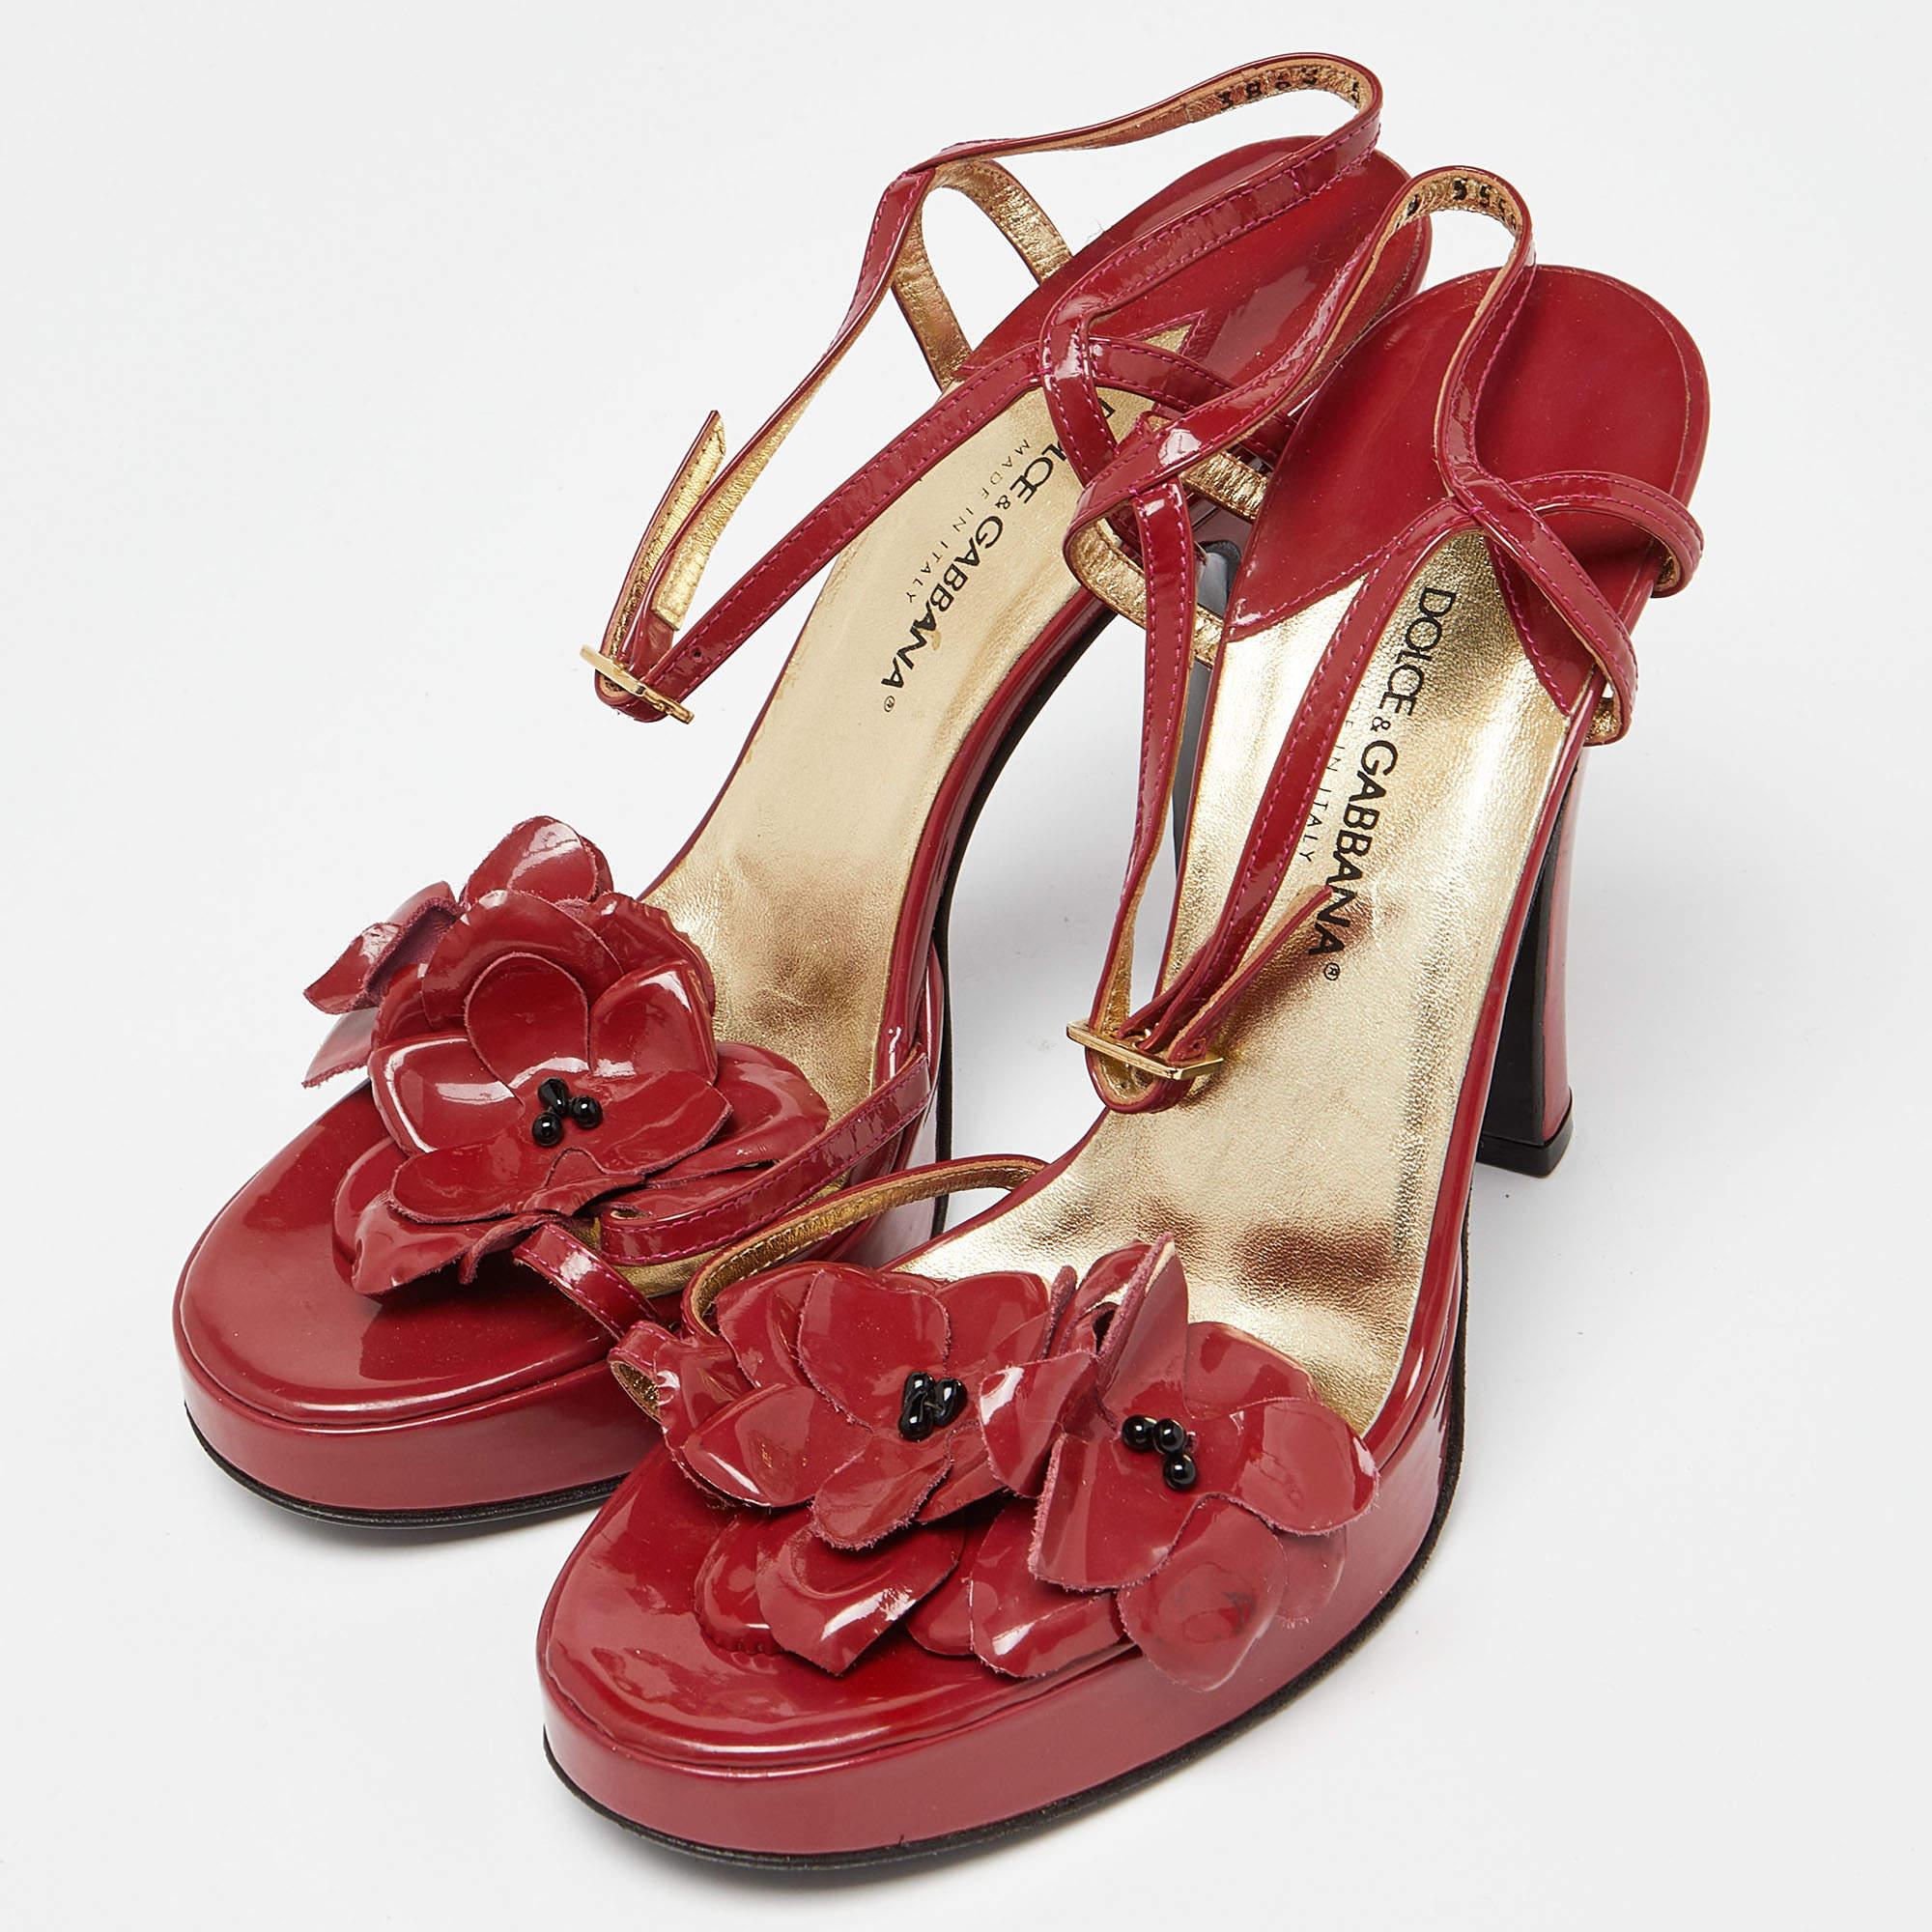 Dolce & Gabbana Red Patent Leather Flower Strappy Sandals Size 38 In Good Condition For Sale In Dubai, Al Qouz 2